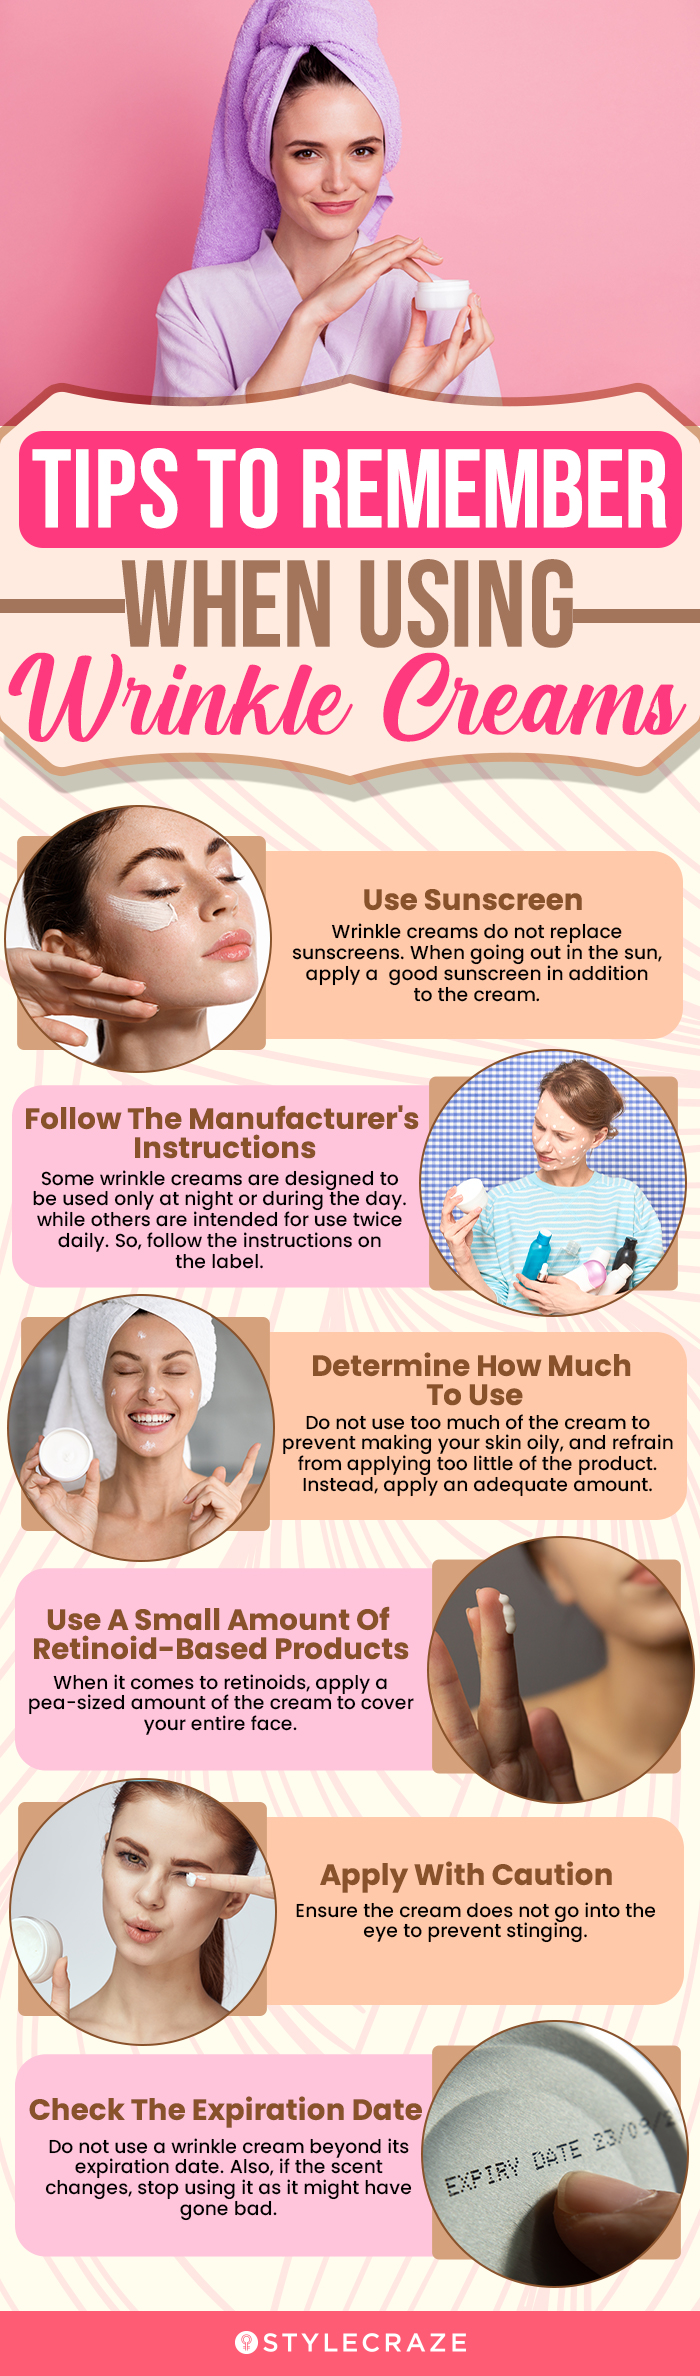 Tips To Remember When Using Wrinkle Creams (infographic)